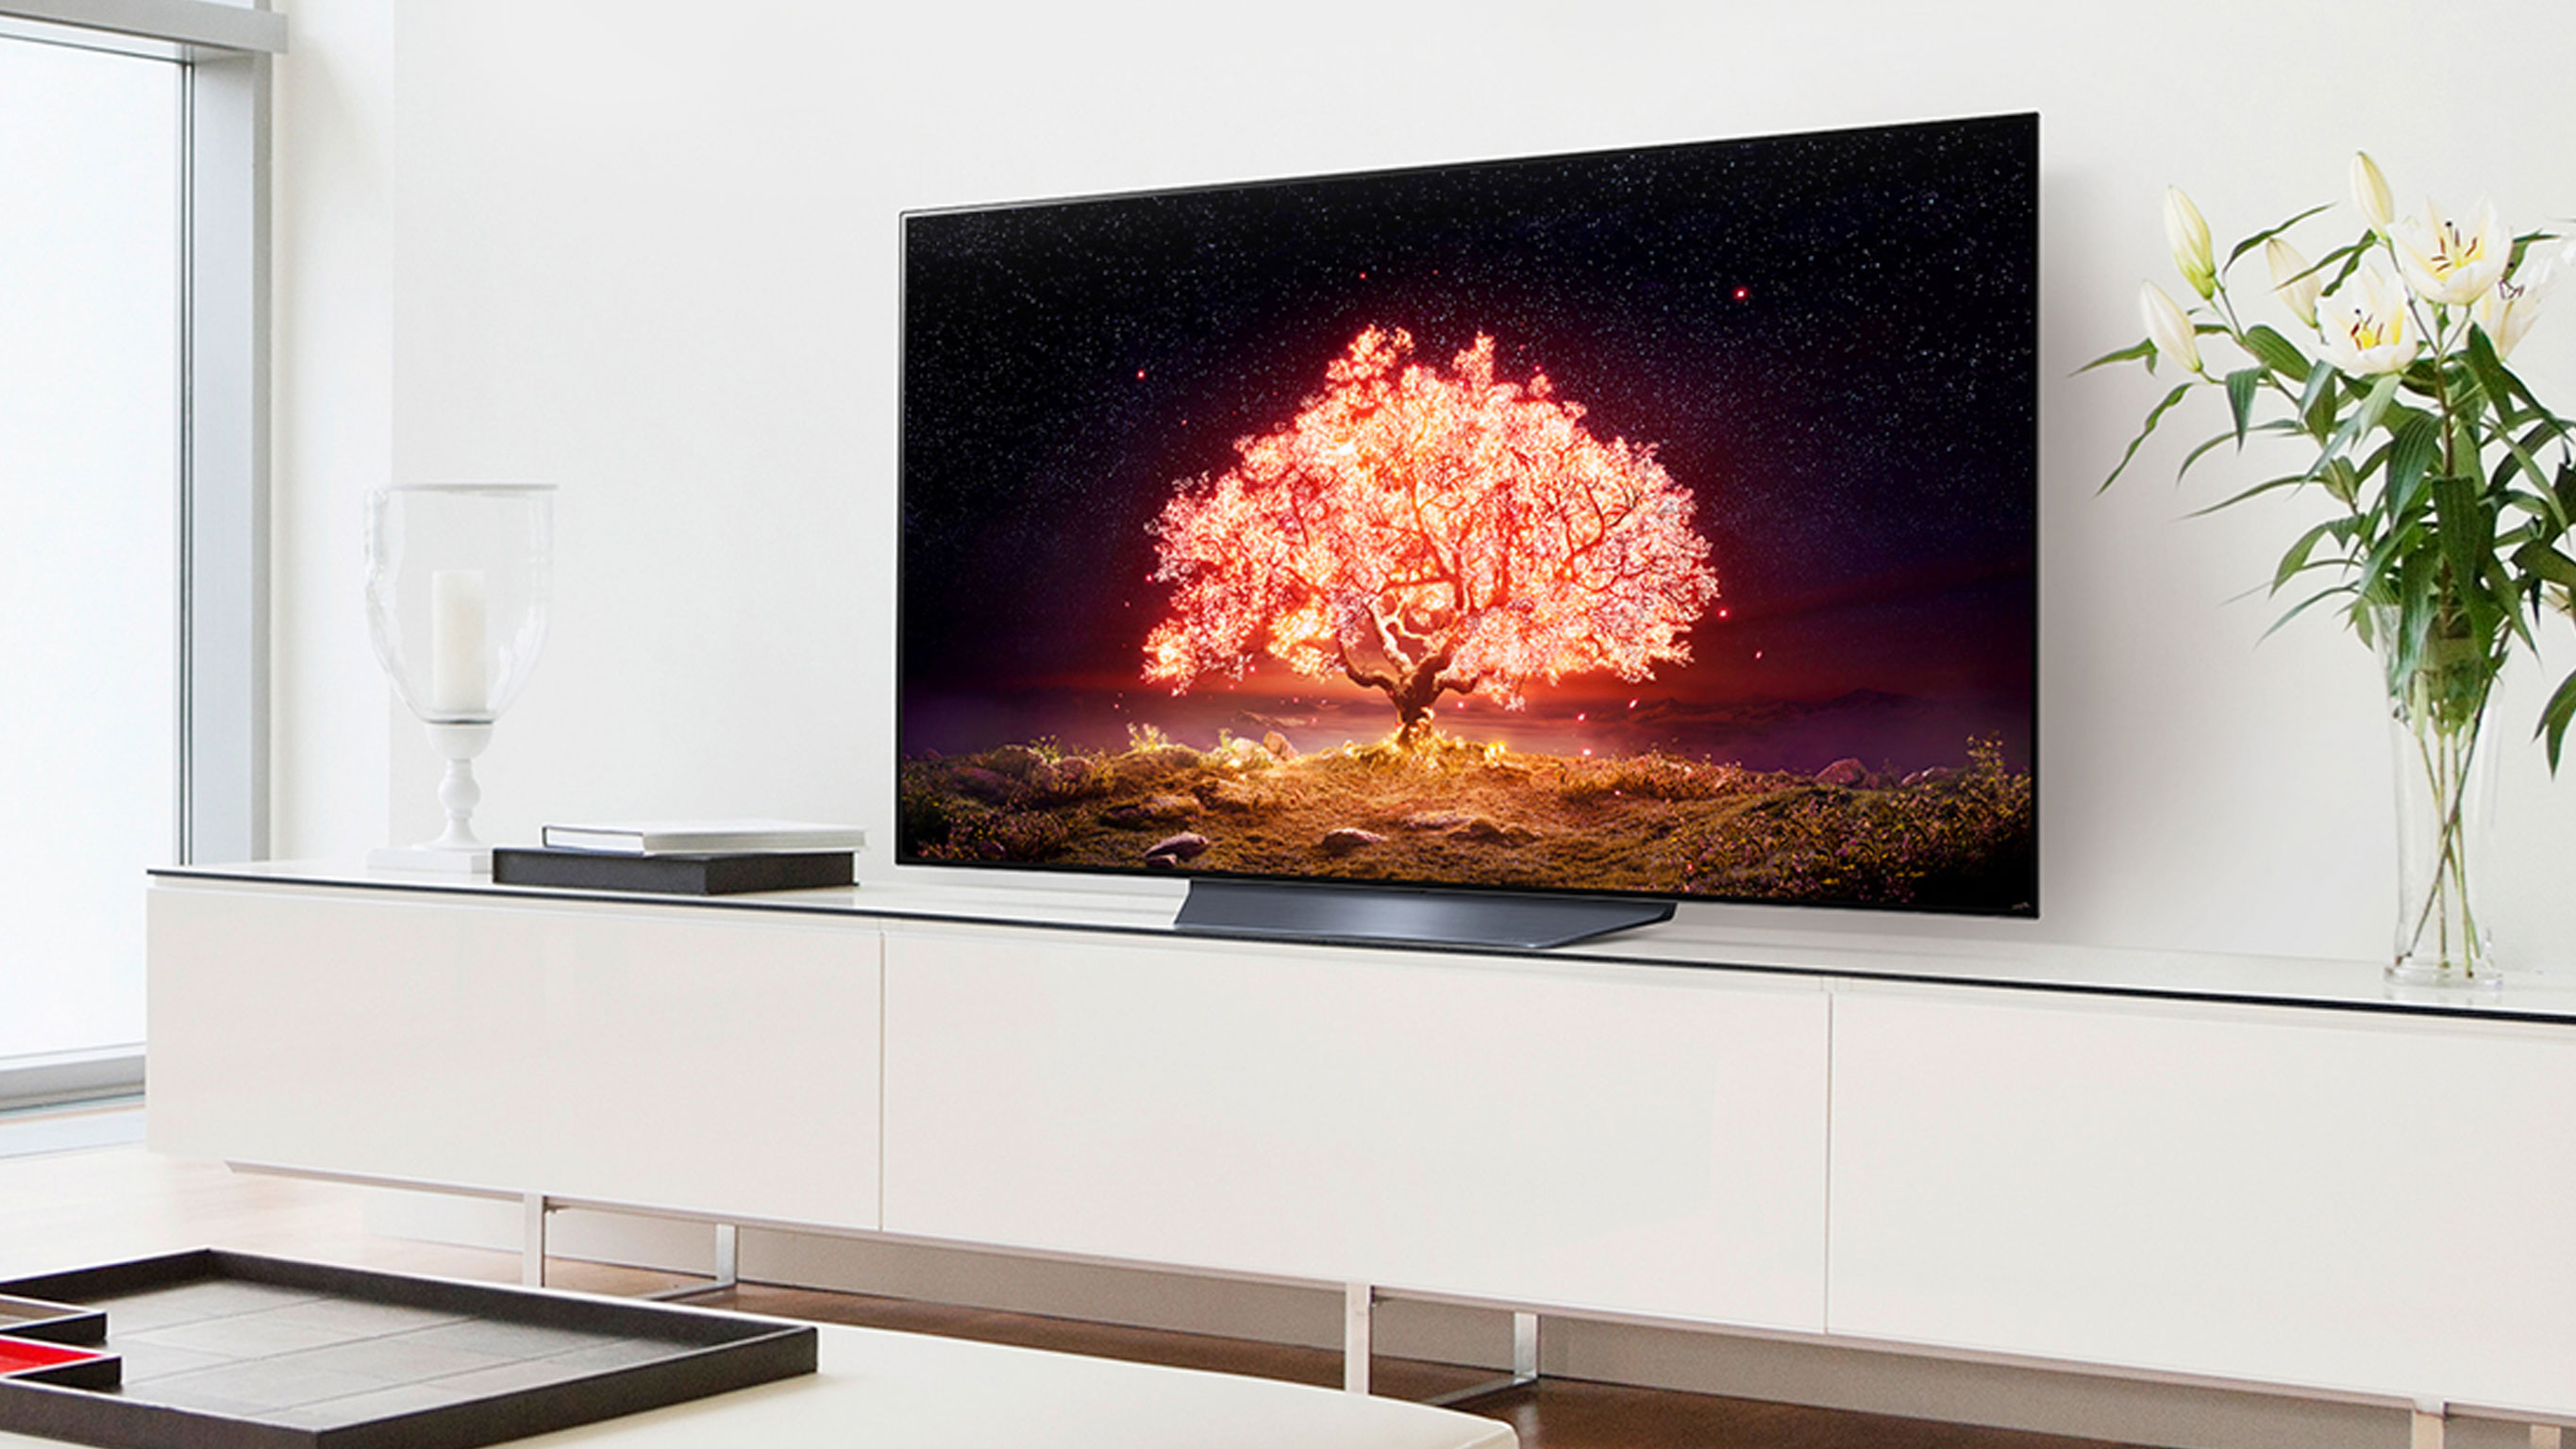 kathedraal Ik heb een Engelse les Treinstation Best LG TVs to buy in 2021: LG OLED, Nano Cell, QNED and 4K UHD TVs |  TechRadar